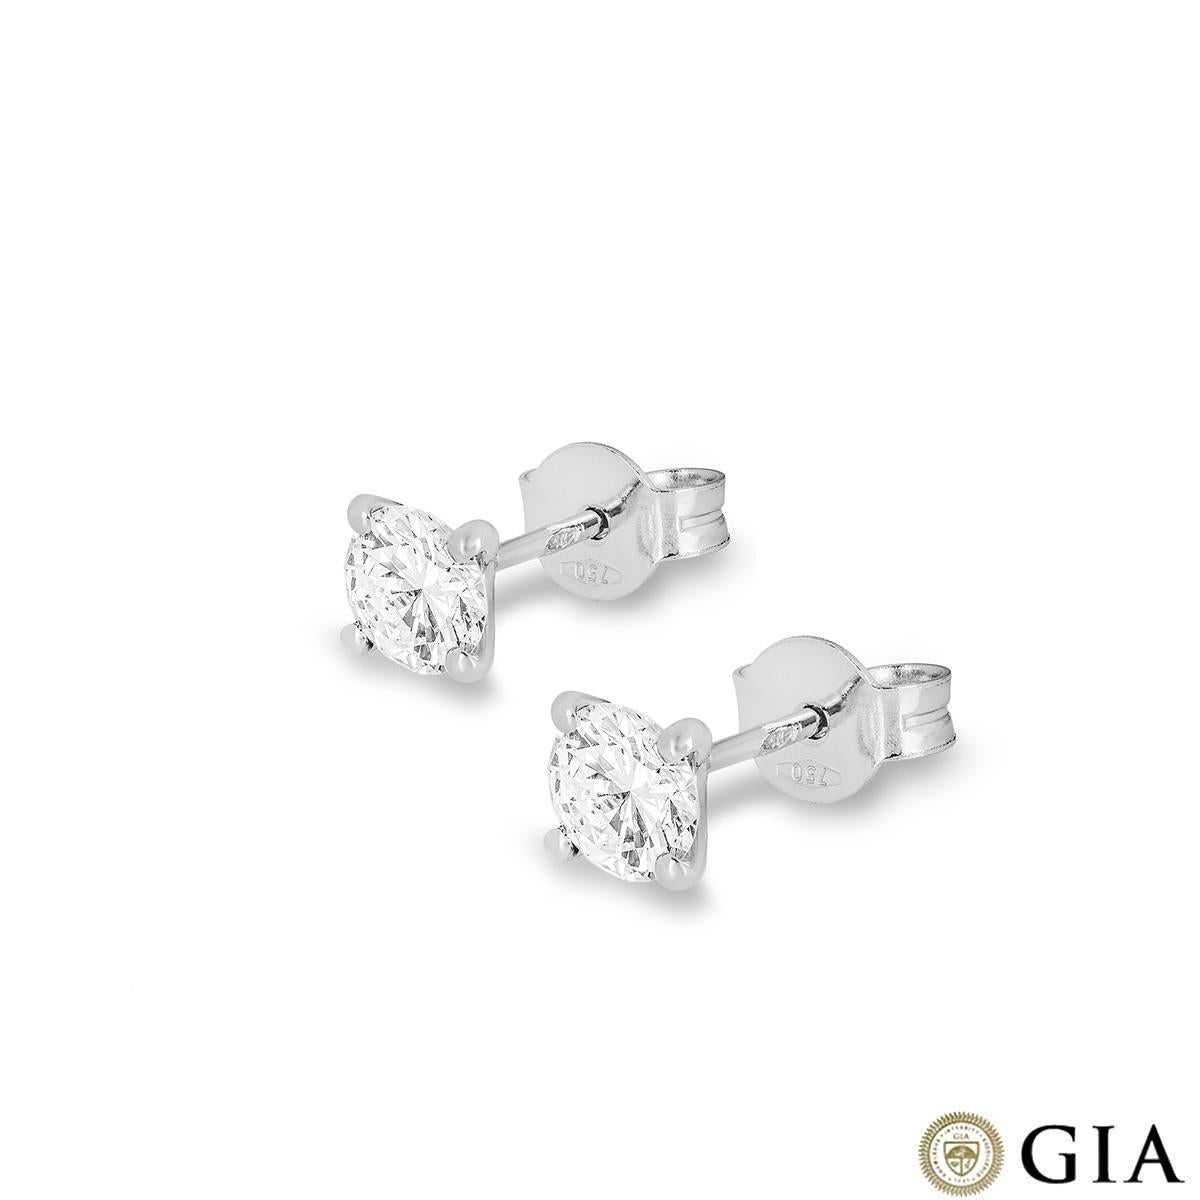 A sparkly pair of 18k white gold diamond stud earrings. The earrings feature round brilliant cut diamonds in a 4 claw setting. The first round brilliant cut diamond weighs 0.53ct, G colour and VS2 clarity. The second round brilliant cut diamond